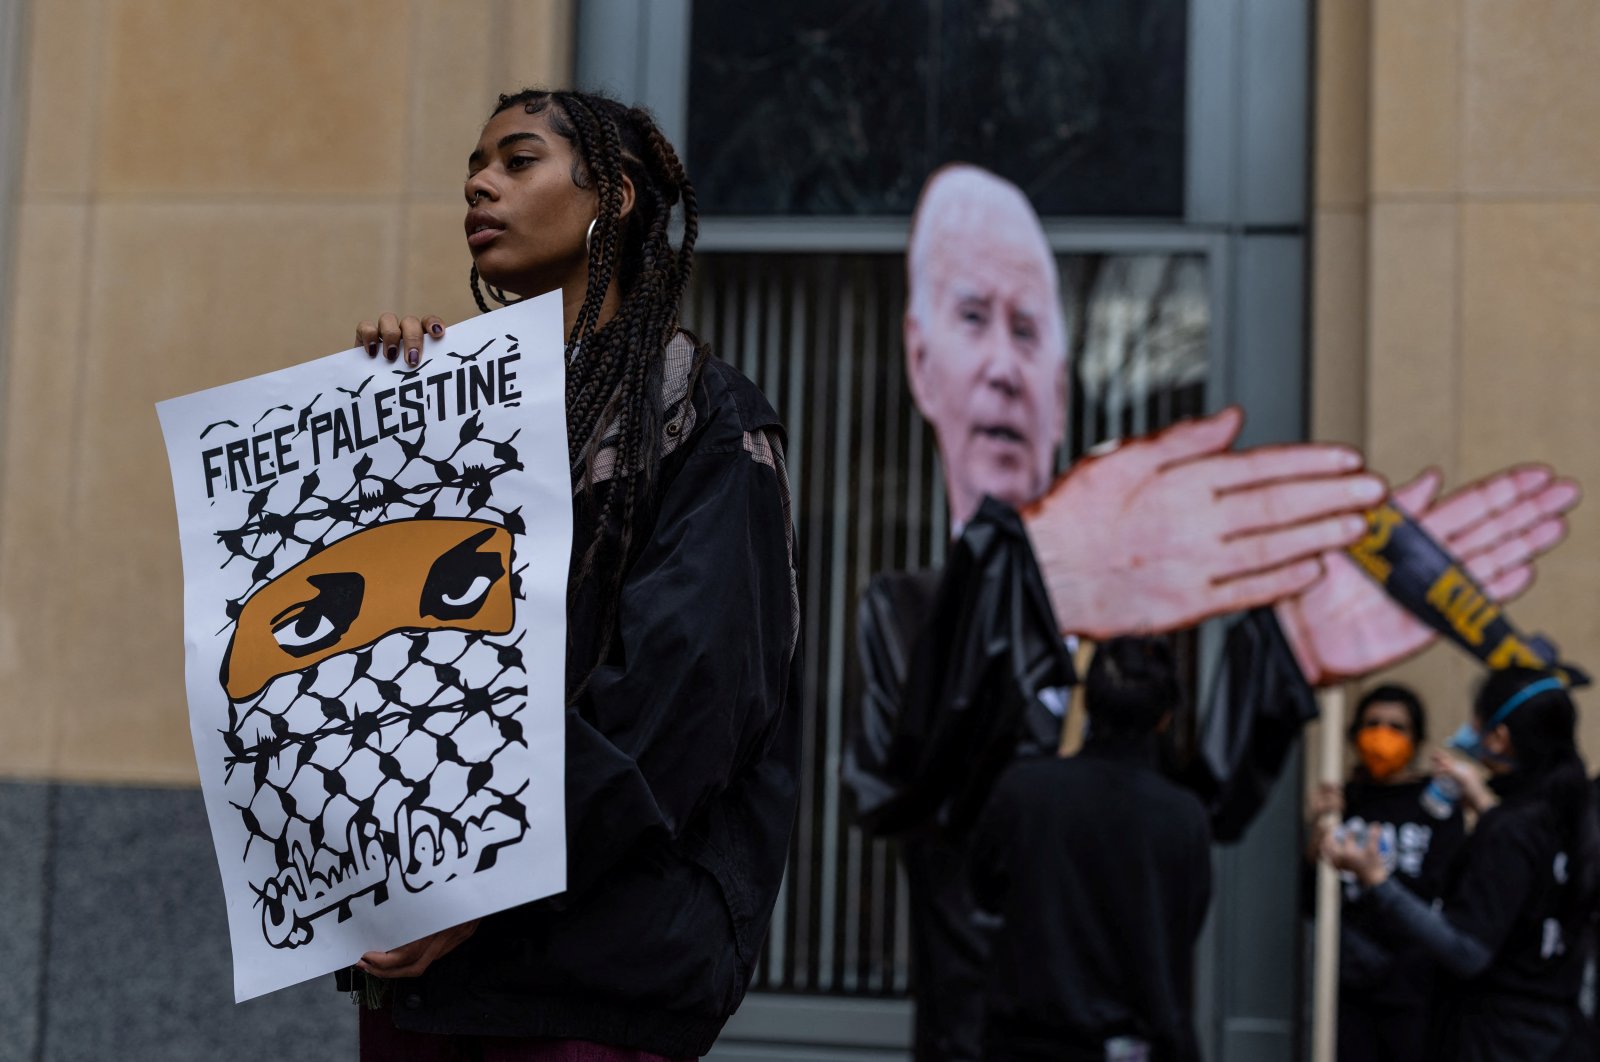 People attend a protest outside of a federal court building where members of the Palestinian community present oral argument in a lawsuit filed against U.S. President Joe Biden, U.S. Secretary of State Antony Blinken and U.S. Secretary of Defense Lloyd Austin seeking an emergency order halting U.S. support for Israel, in Oakland, California, U.S., Jan. 26, 2024. (Reuters Photo)